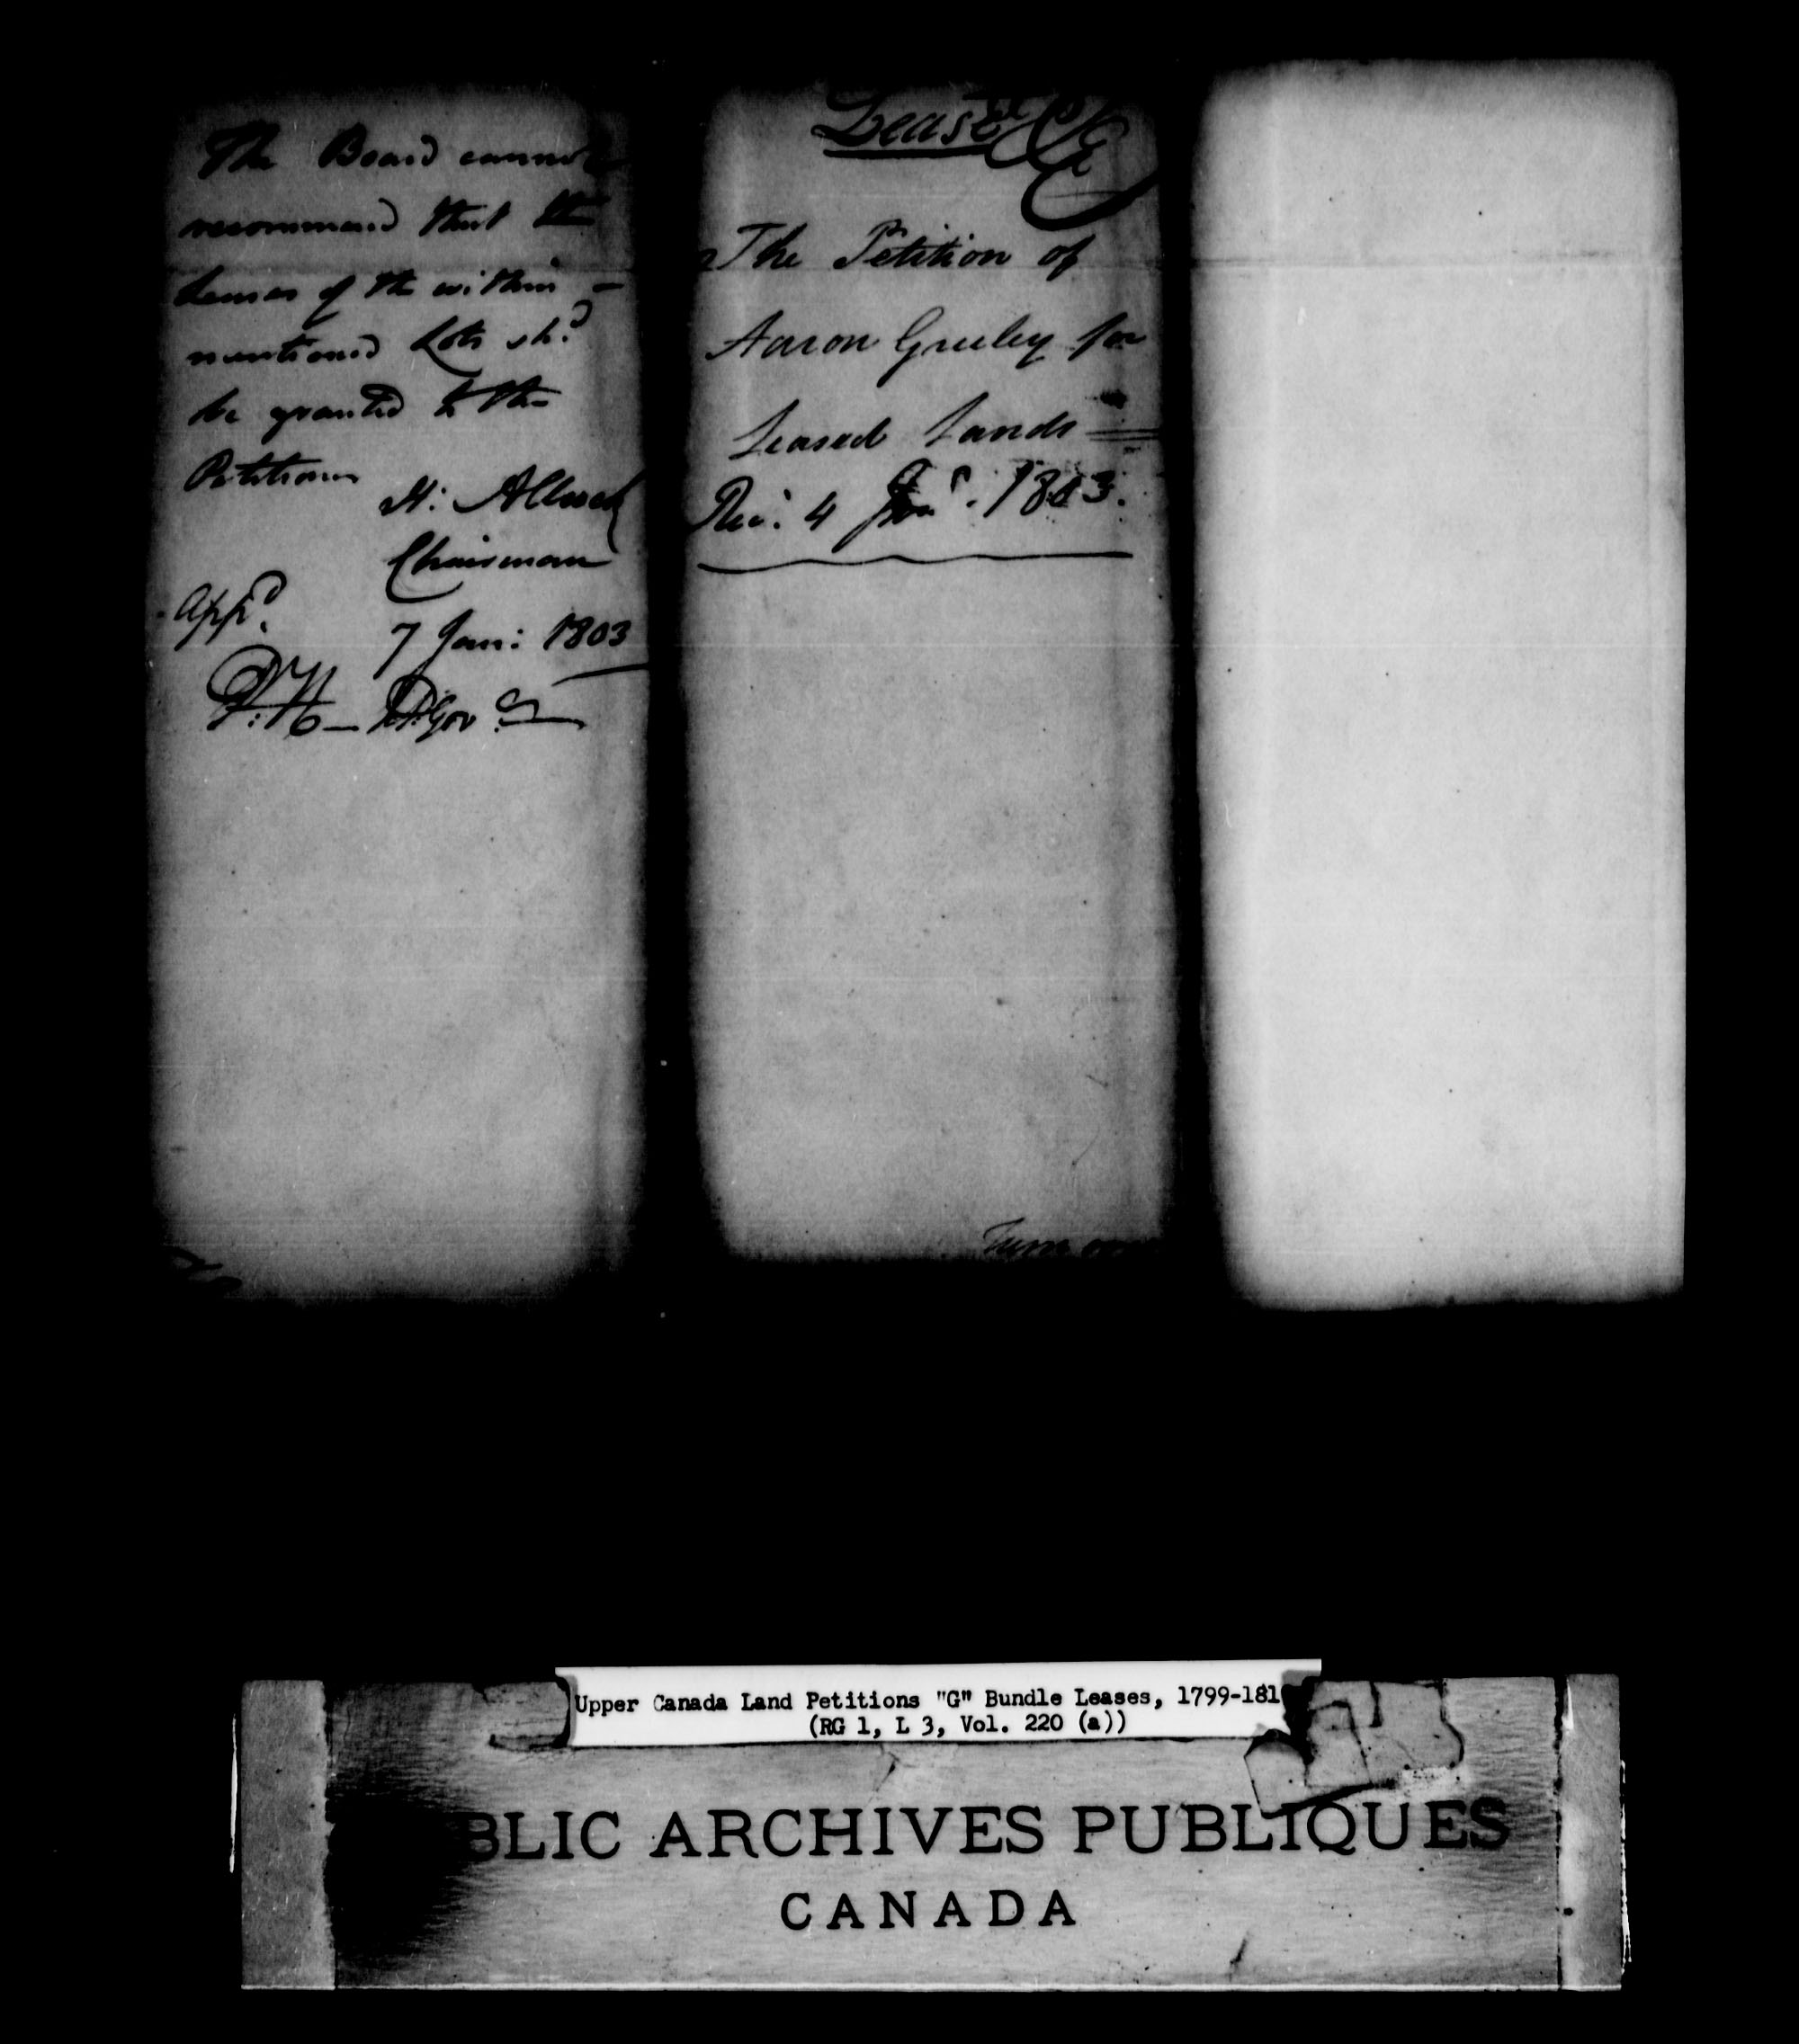 Title: Upper Canada Land Petitions (1763-1865) - Mikan Number: 205131 - Microform: c-2041